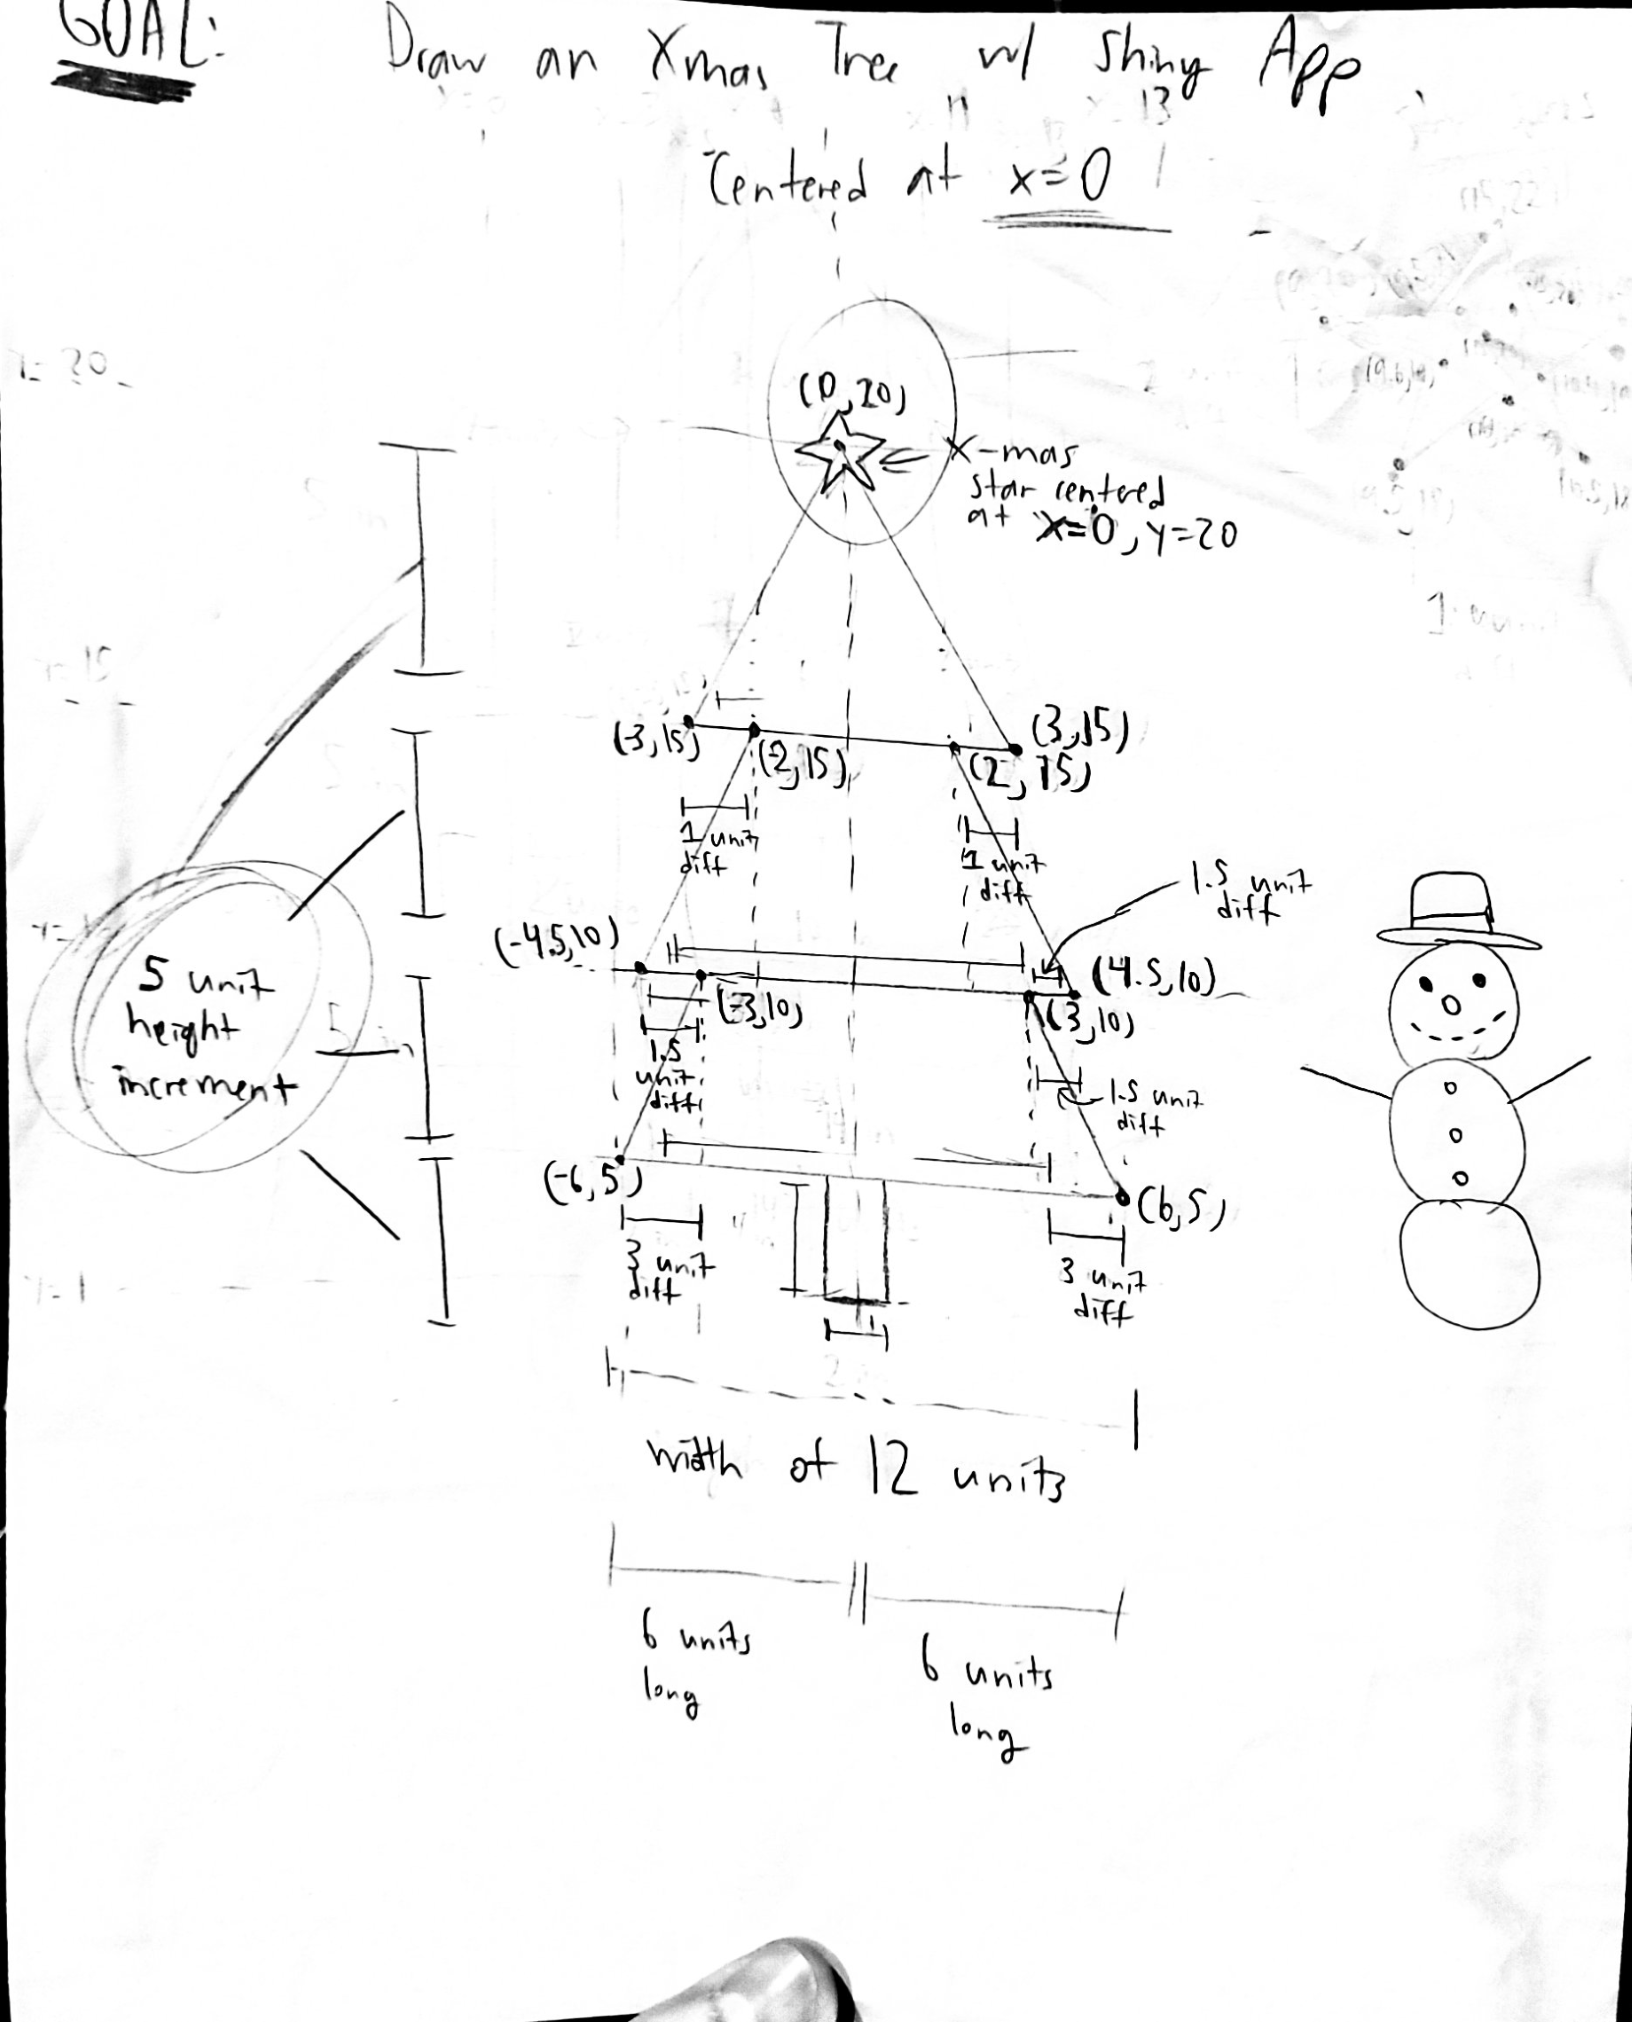 An initial physical draft I drew of the holiday card where I have drawn out a Christmas tree and a snowman with numbers marking coordiantes for different aprts of the Christmas tree as well as the measurements for the lengths, widths, and heights of different aspects of the tree.  The top of the paper reads, 'GOAL: Draw an Xmas Tree w/ Shiny App'.